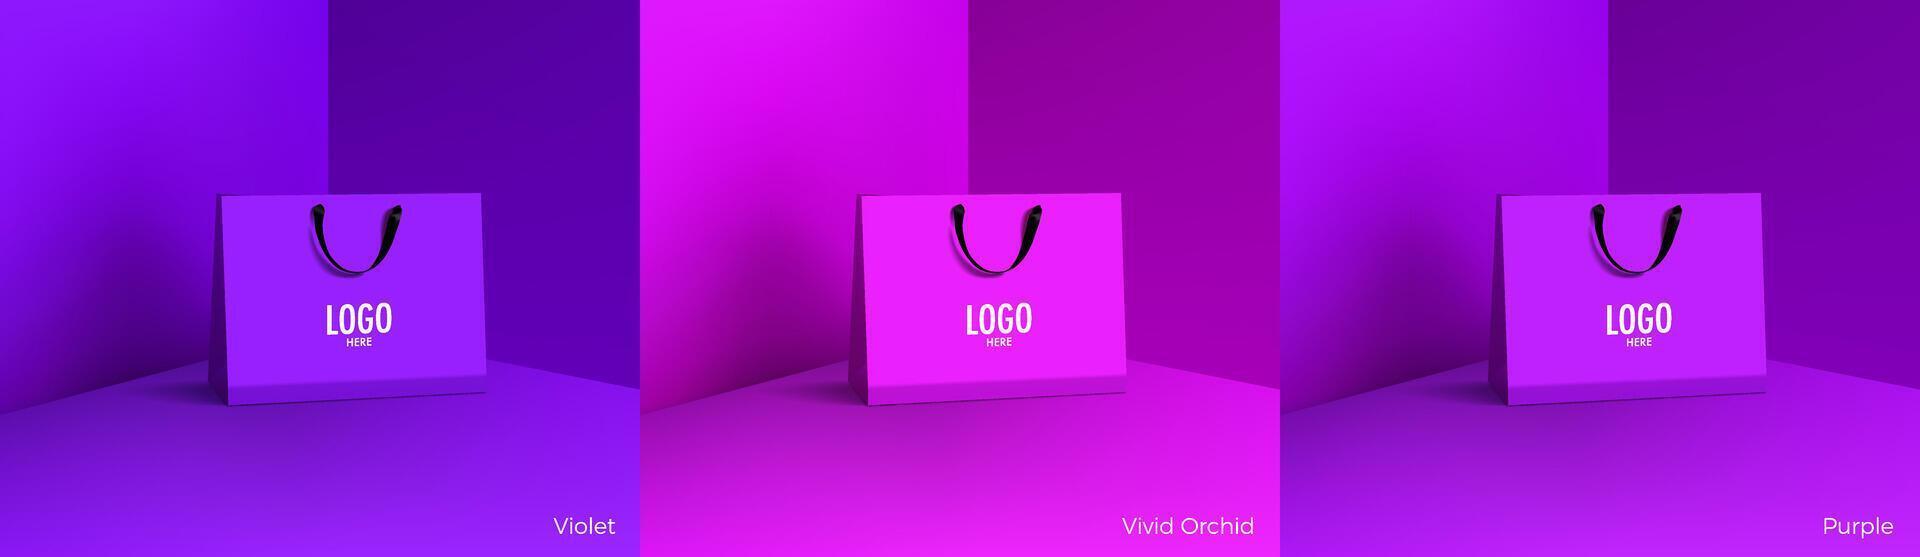 Shopping paper bag. Mockup set of realistic shopping bag for branding and corporate identity design. Paper packaging template. For promotion, discount, sale concept. 3D vector isolated illustration.